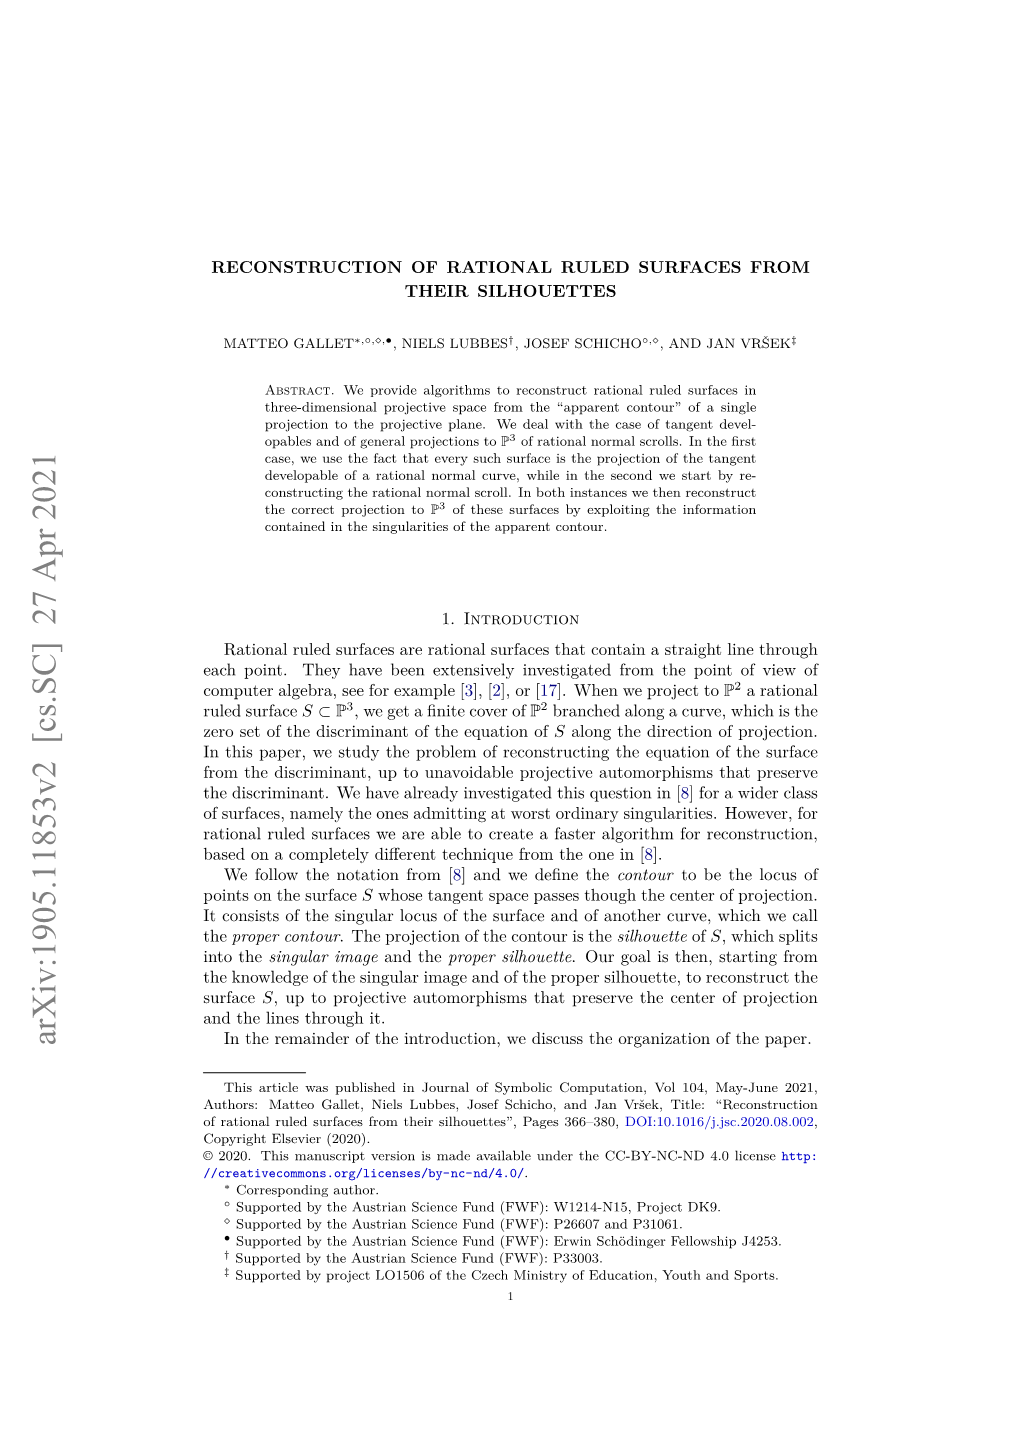 Arxiv:1905.11853V2 [Cs.SC] 27 Apr 2021 in the Remainder of the Introduction, We Discuss the Organization of the Paper